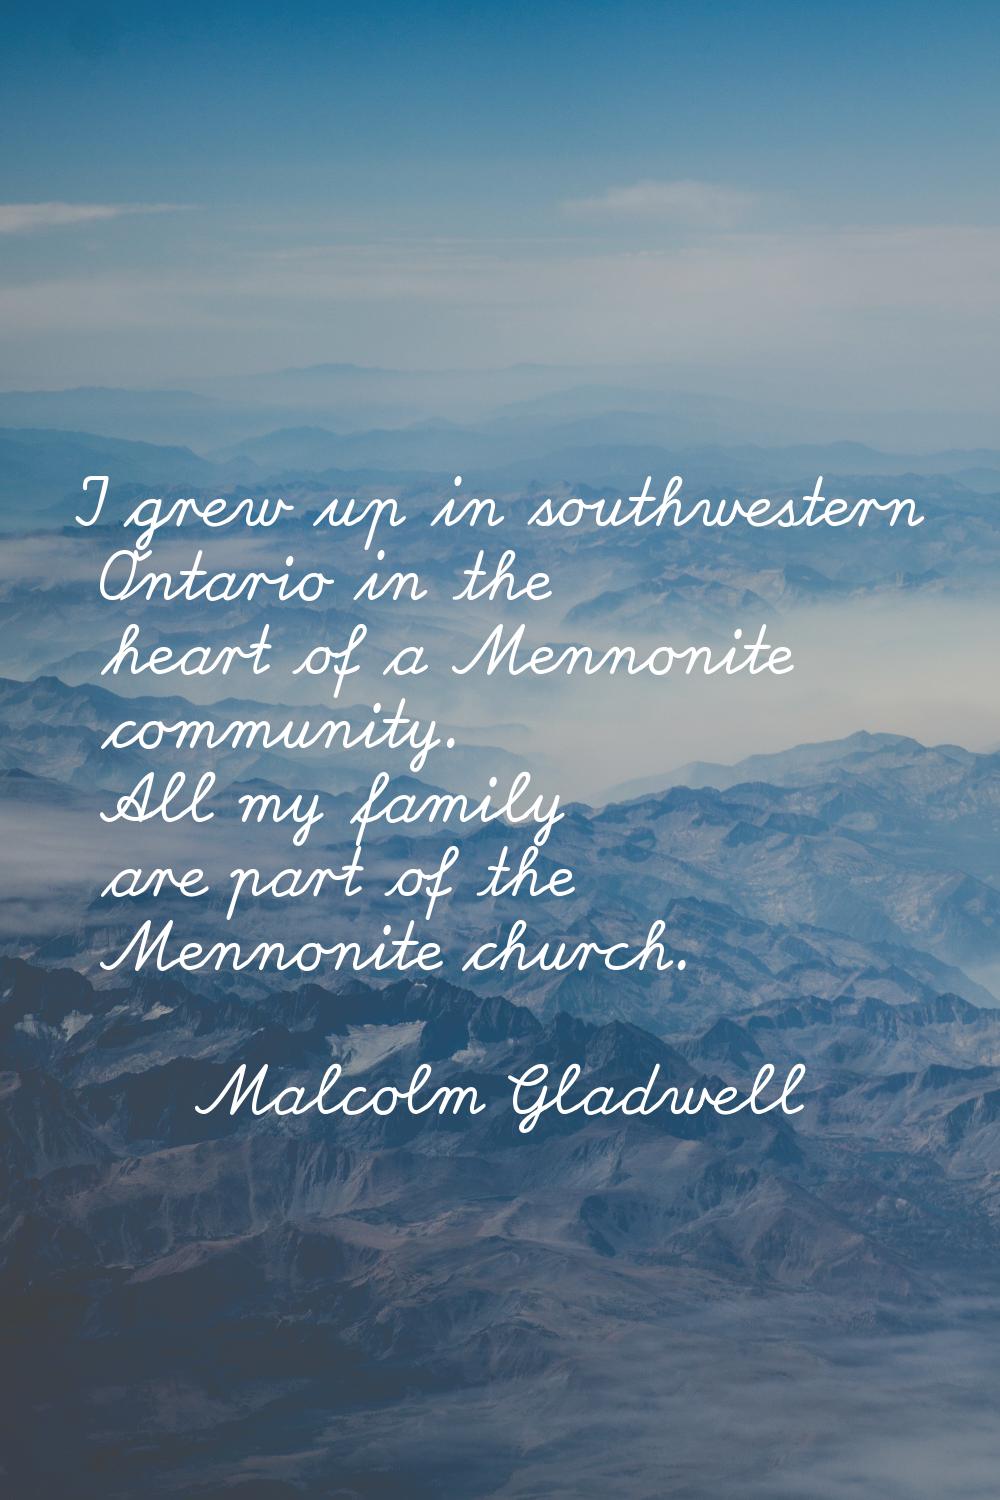 I grew up in southwestern Ontario in the heart of a Mennonite community. All my family are part of 